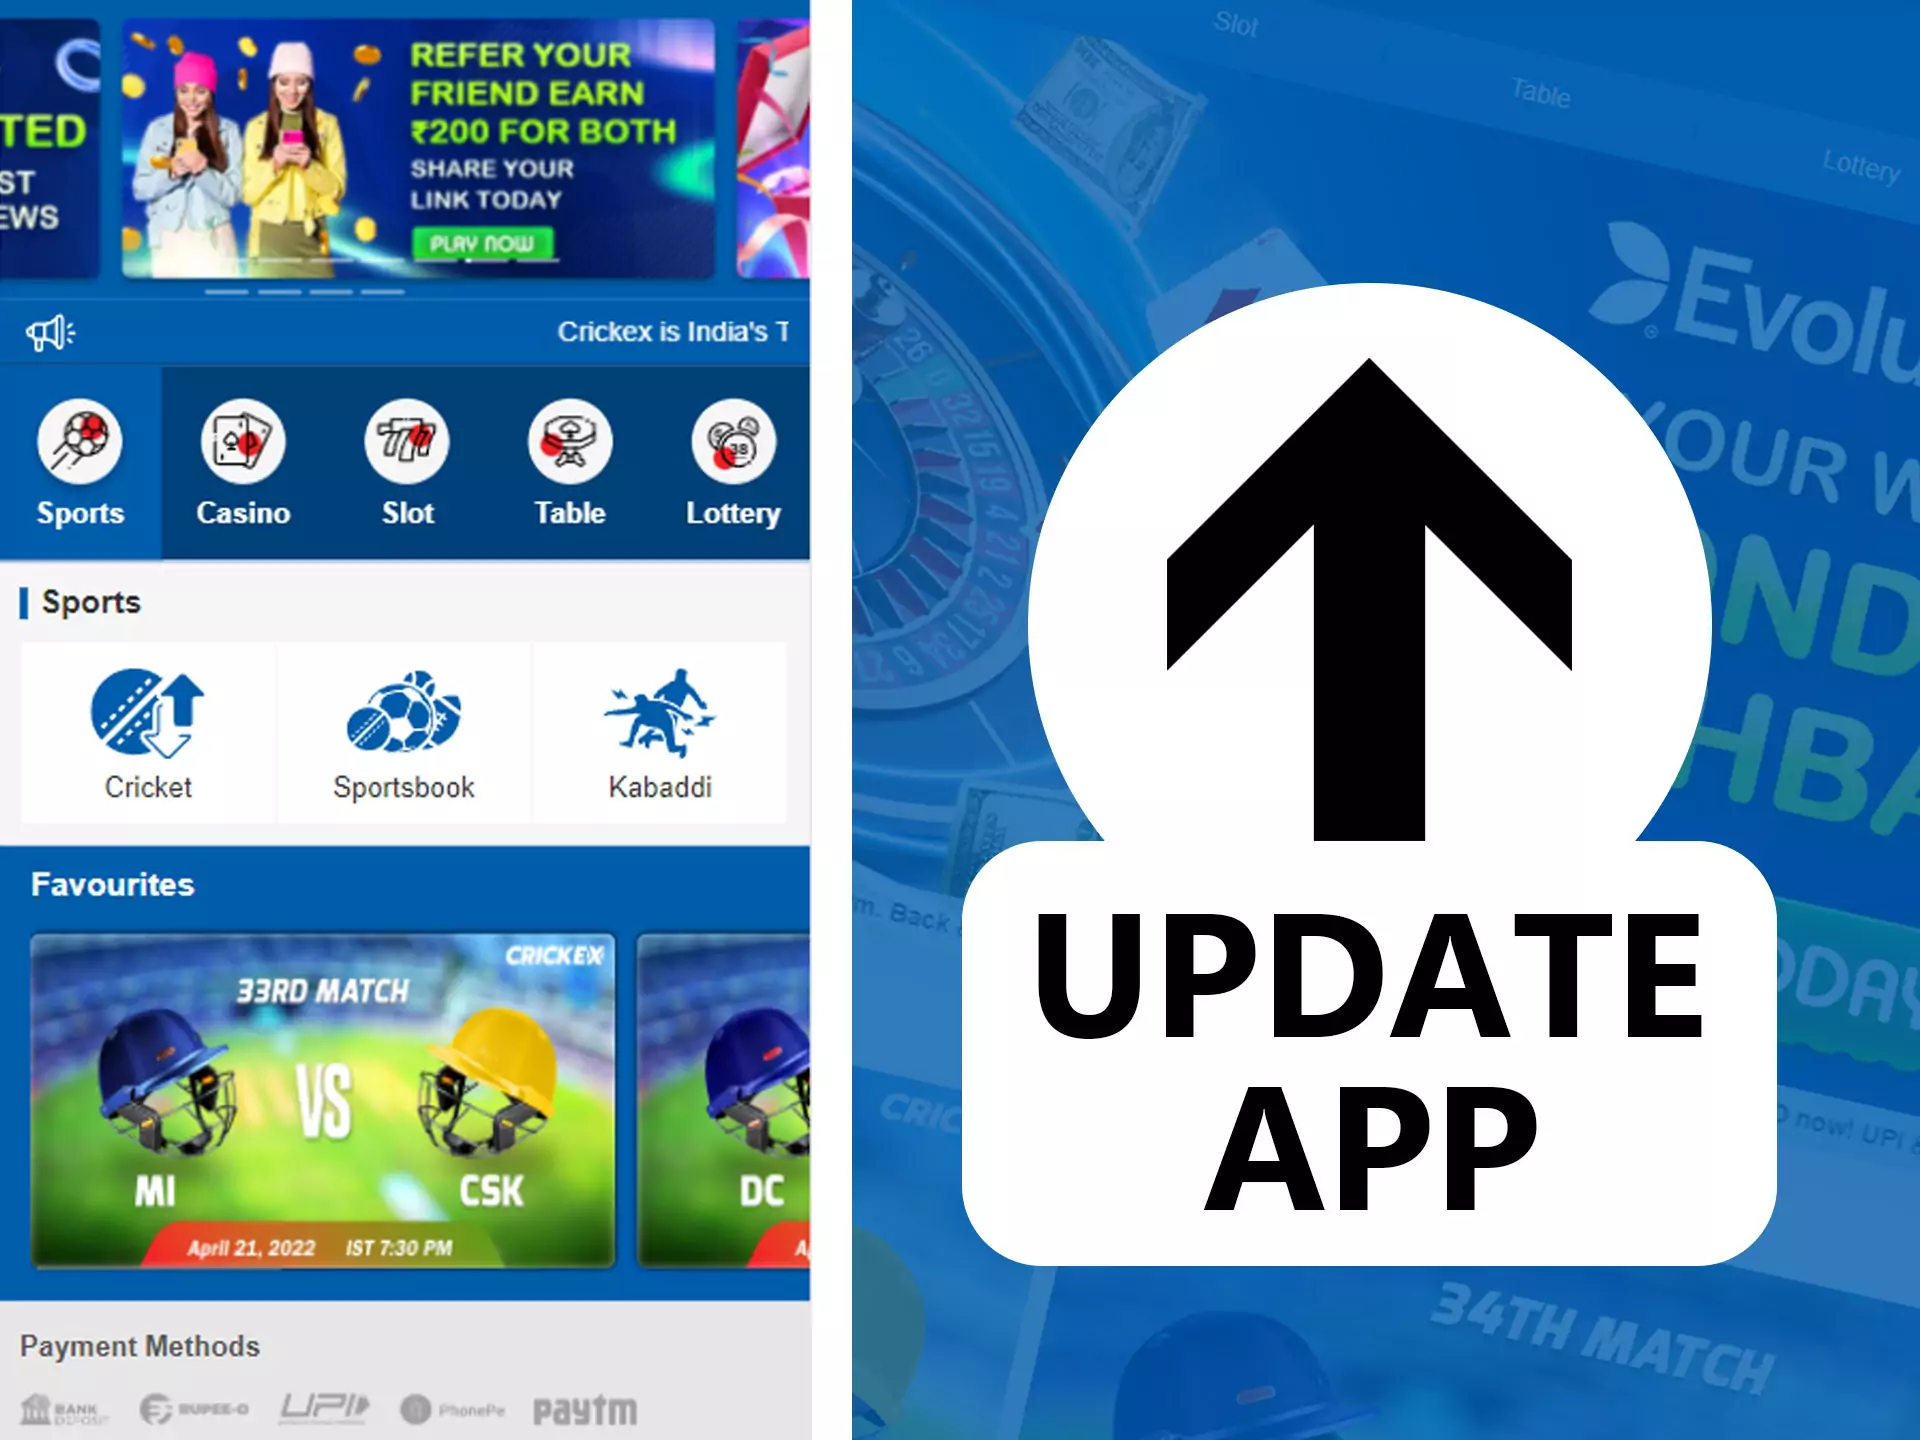 The Crickex app receives regular updates from the developers.